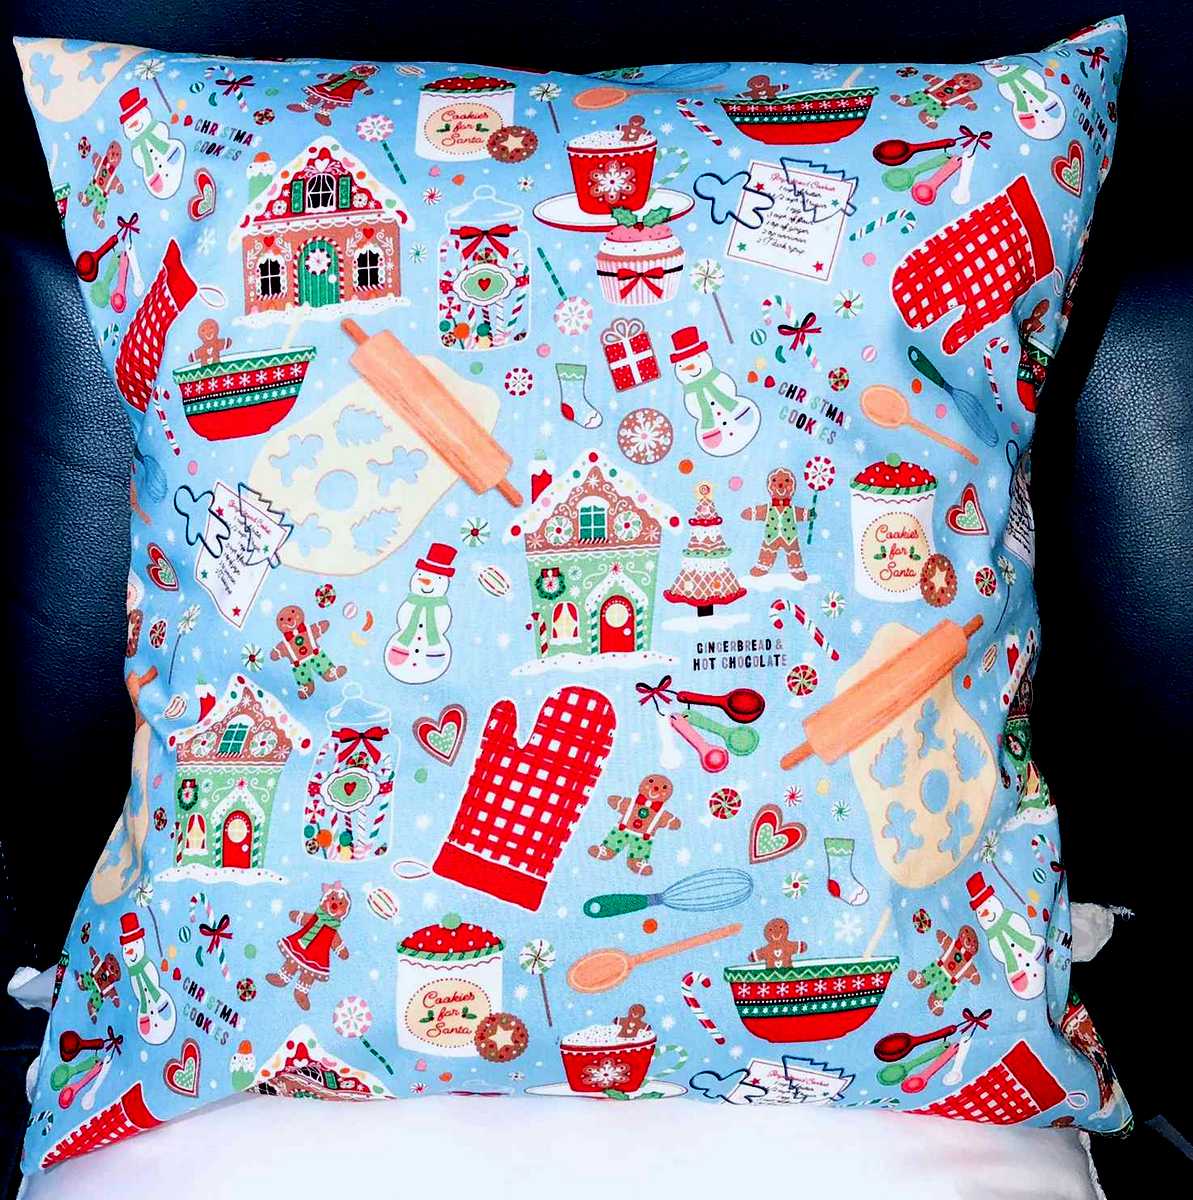 Christmas Cookie Baking Gingerbread House Candy Kitchen Fun Pillow Cover